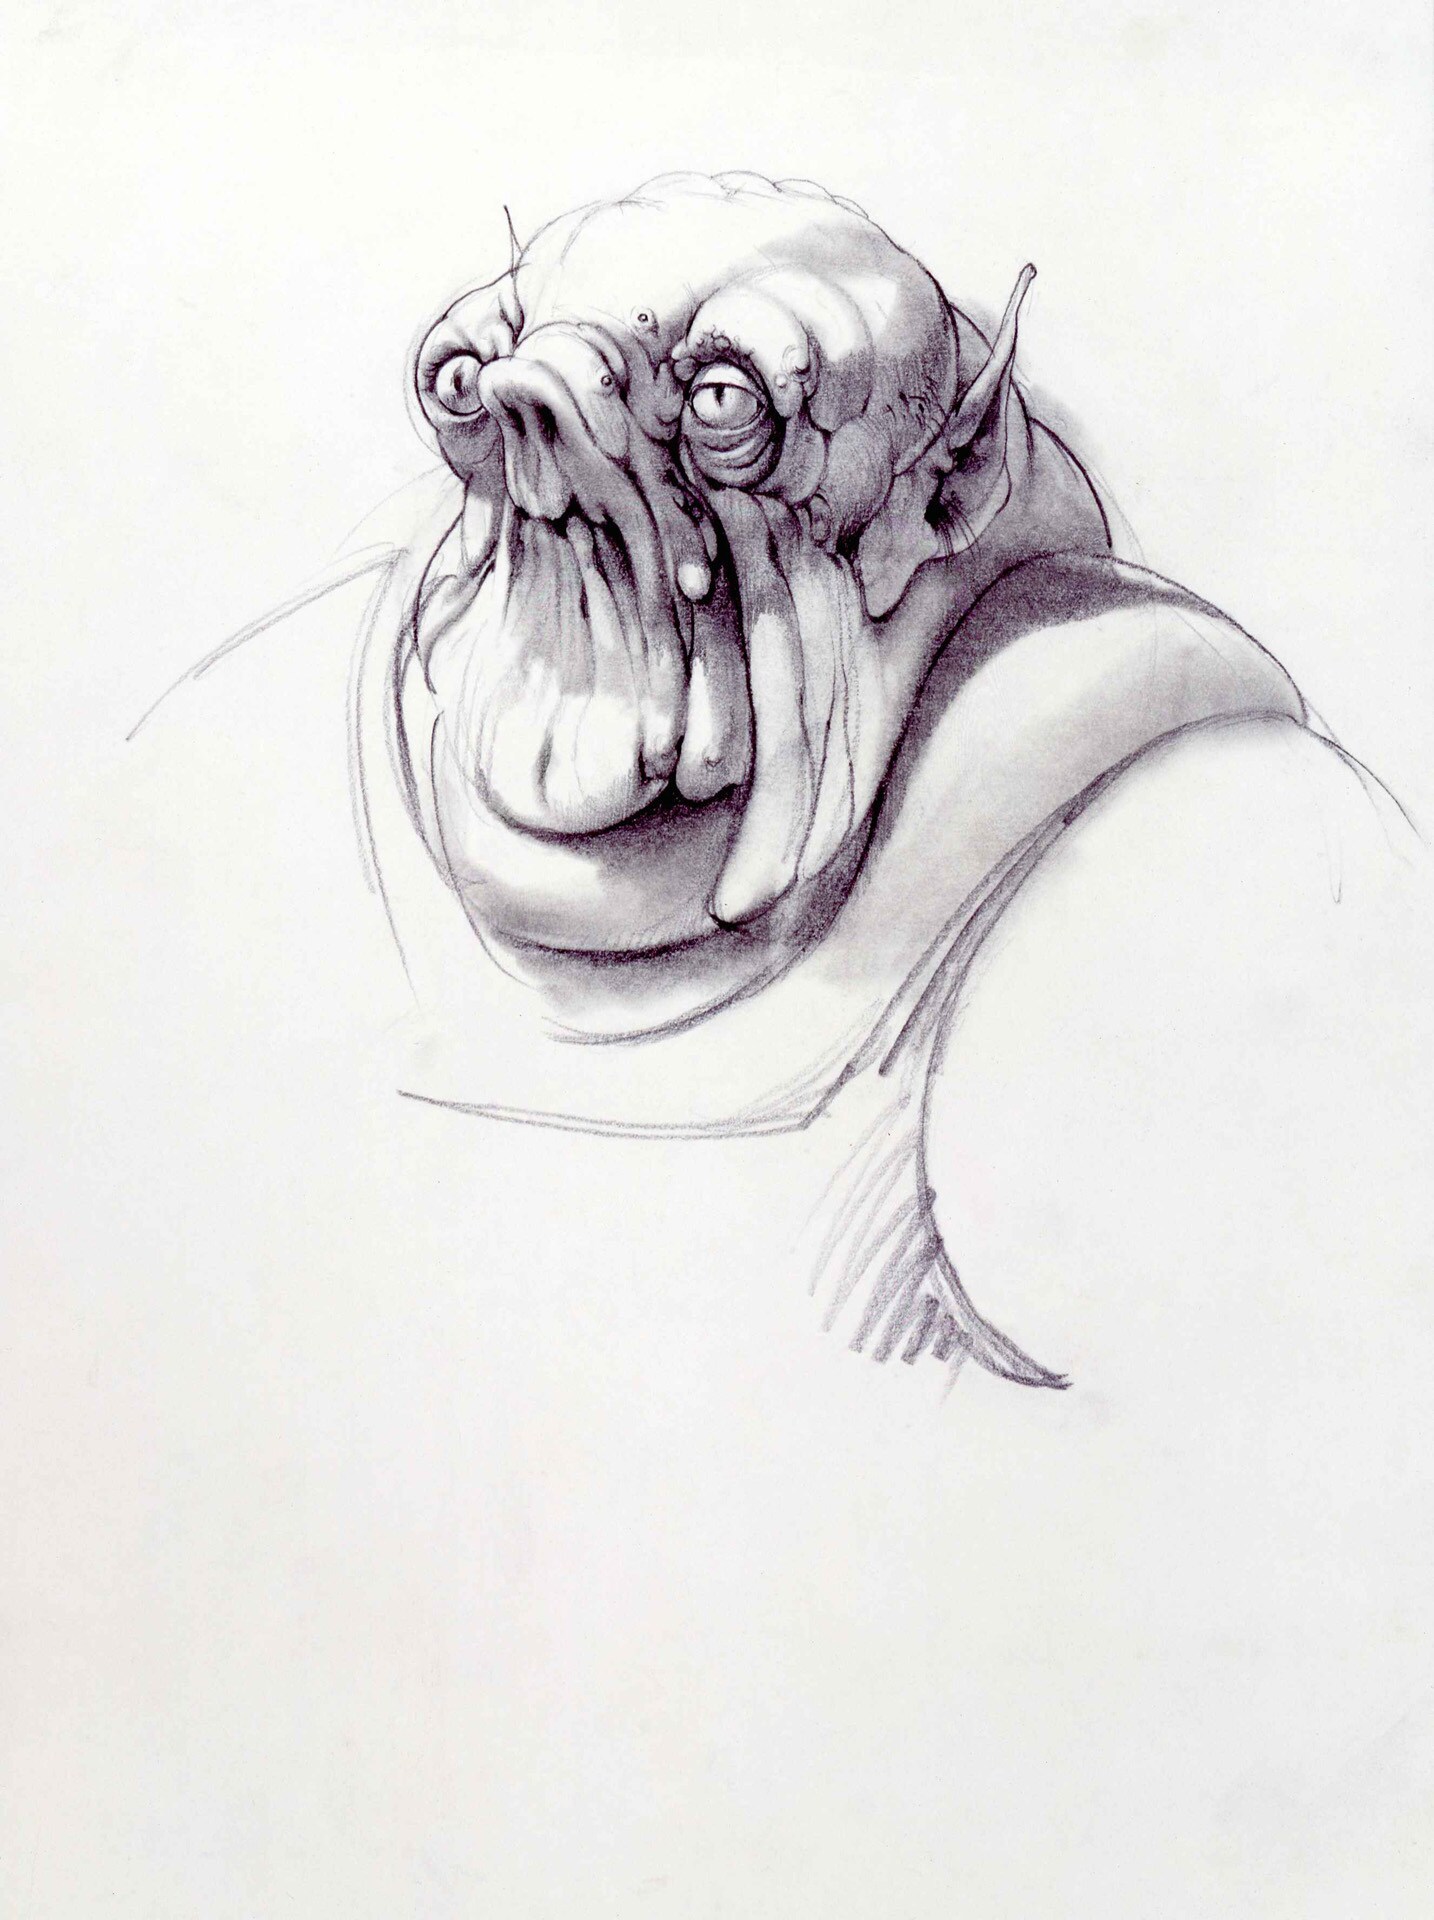 Azmorigan was based on an early Ralph McQuarrie design for Jabba the Hutt developed for Return of...